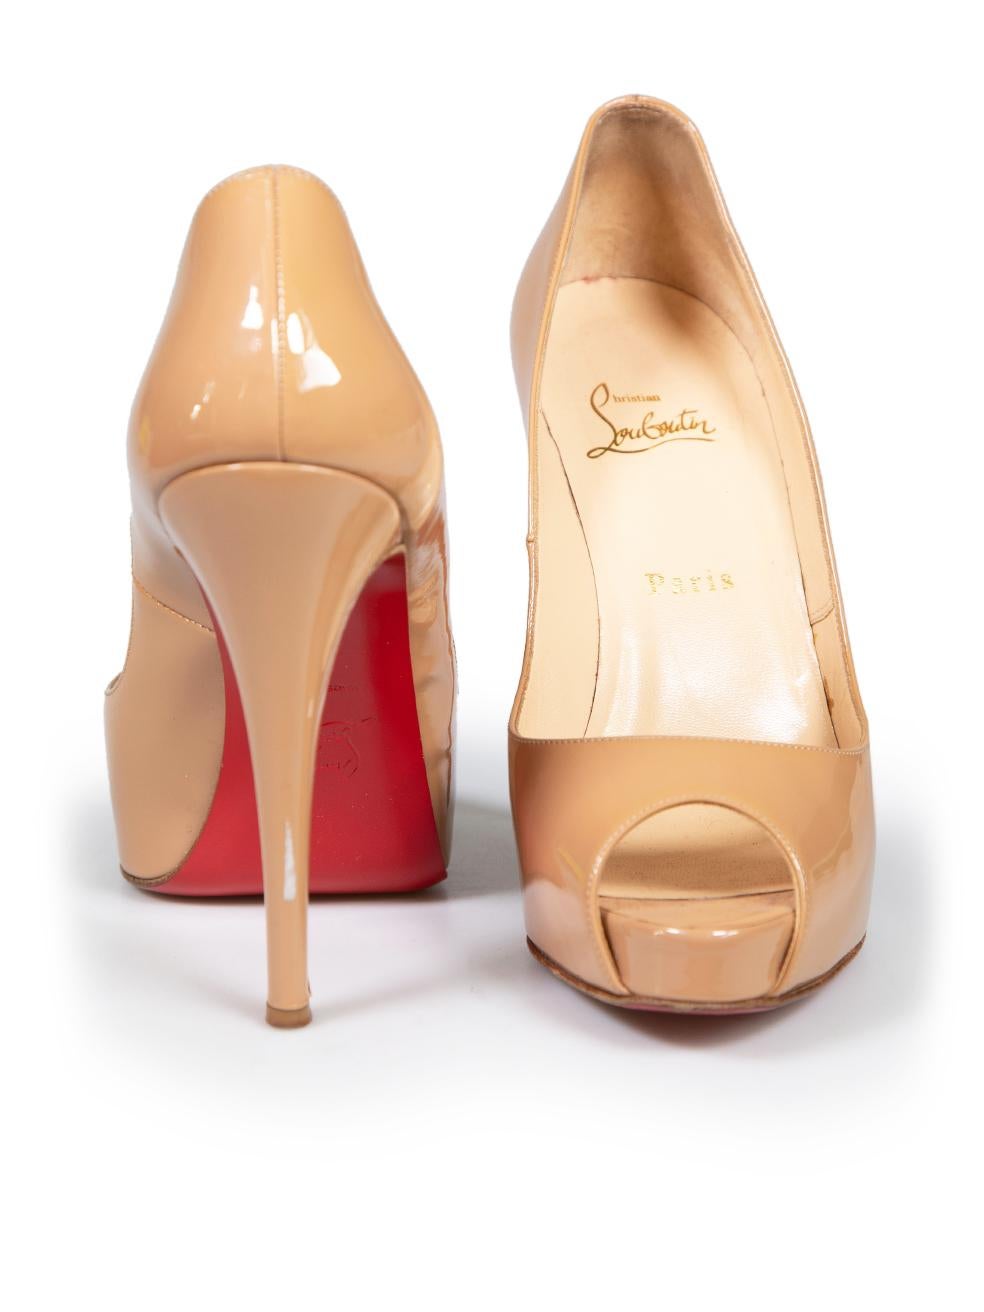 Christian Louboutin Beige Patent Peep Toe Heels Size IT 39 In Good Condition For Sale In London, GB